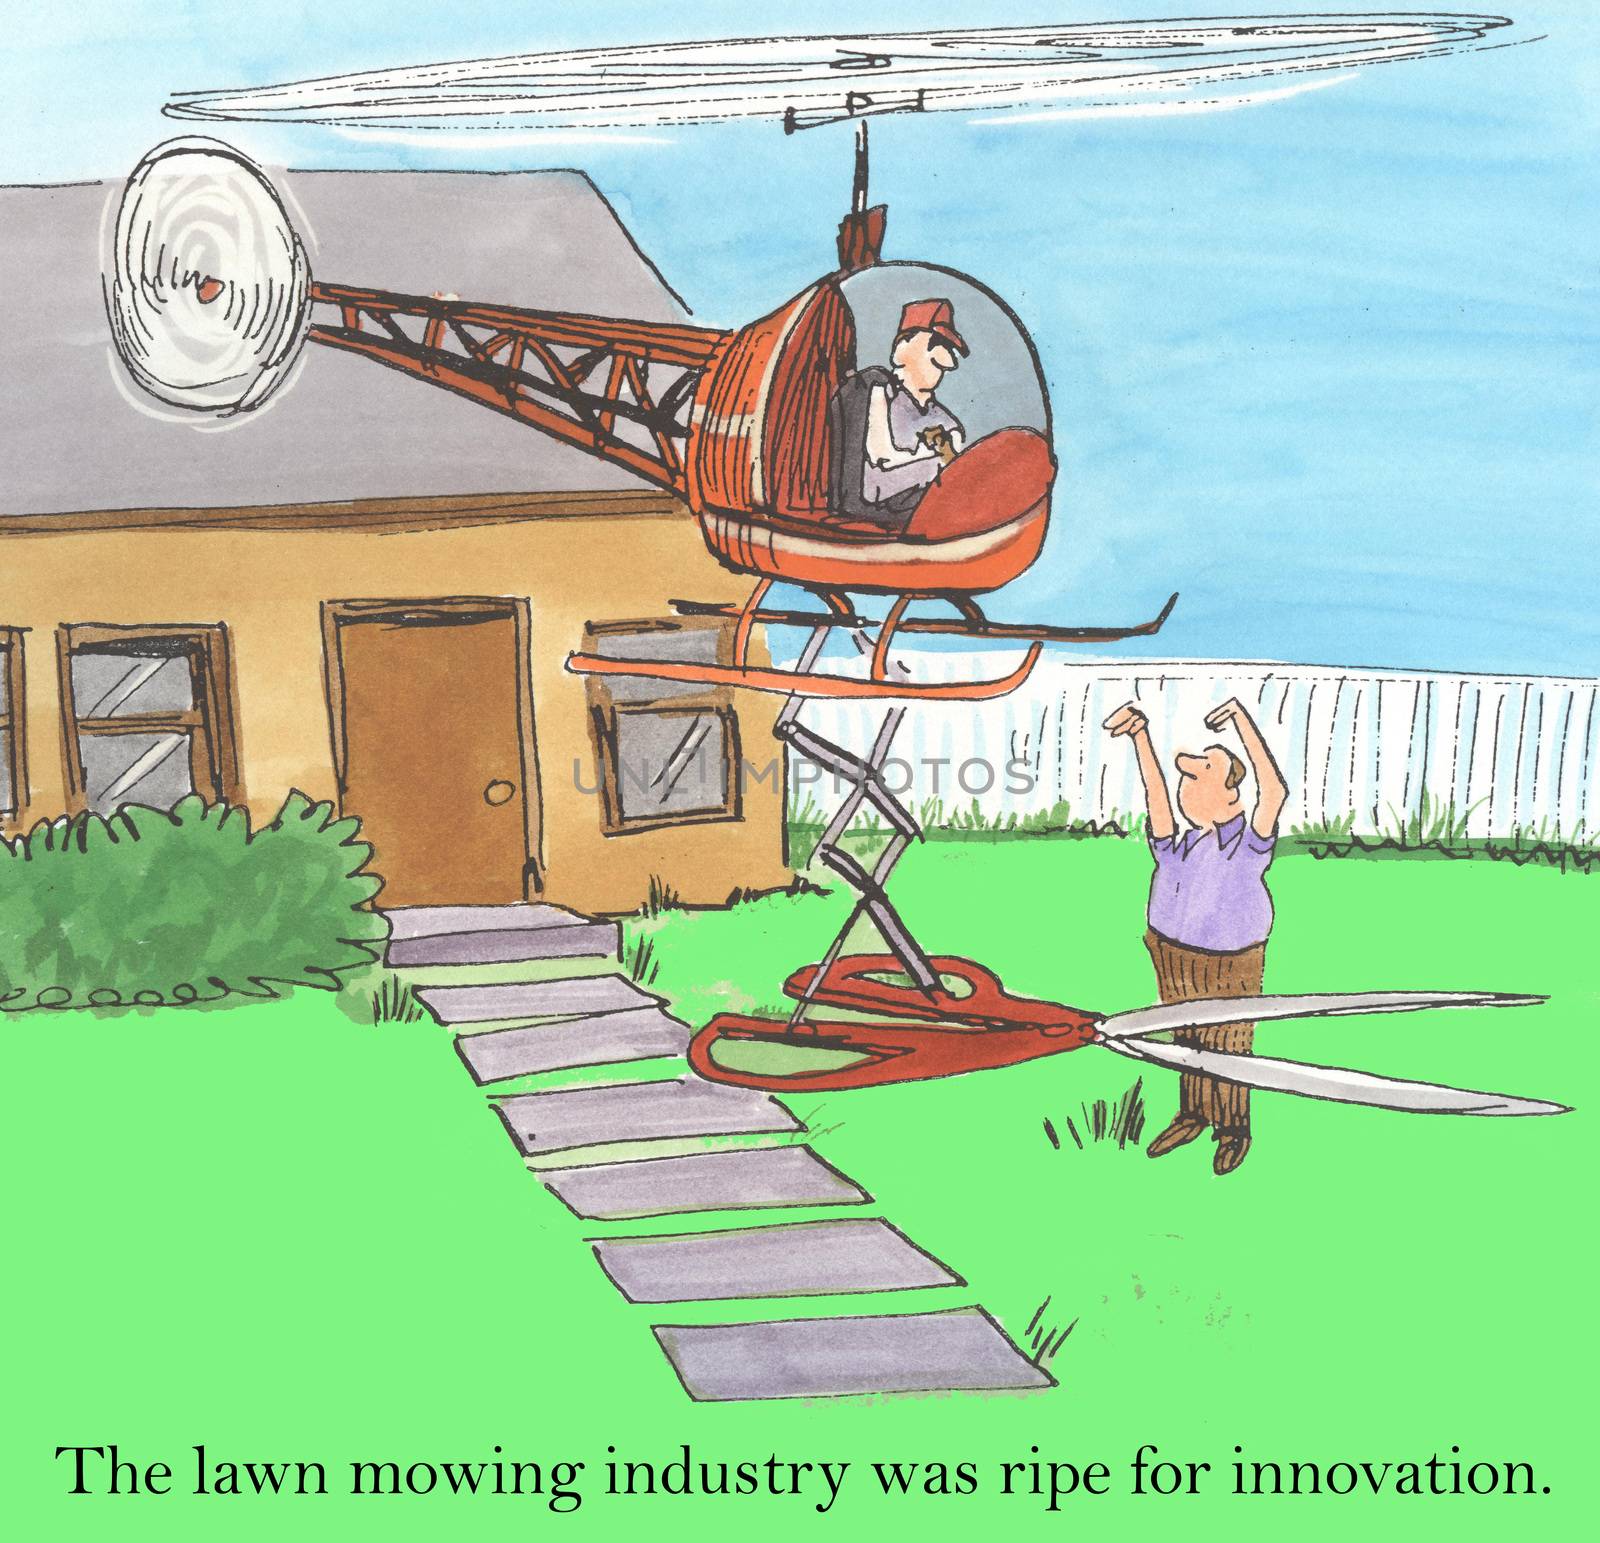 The lawn mowing industry was ripe for innovation.